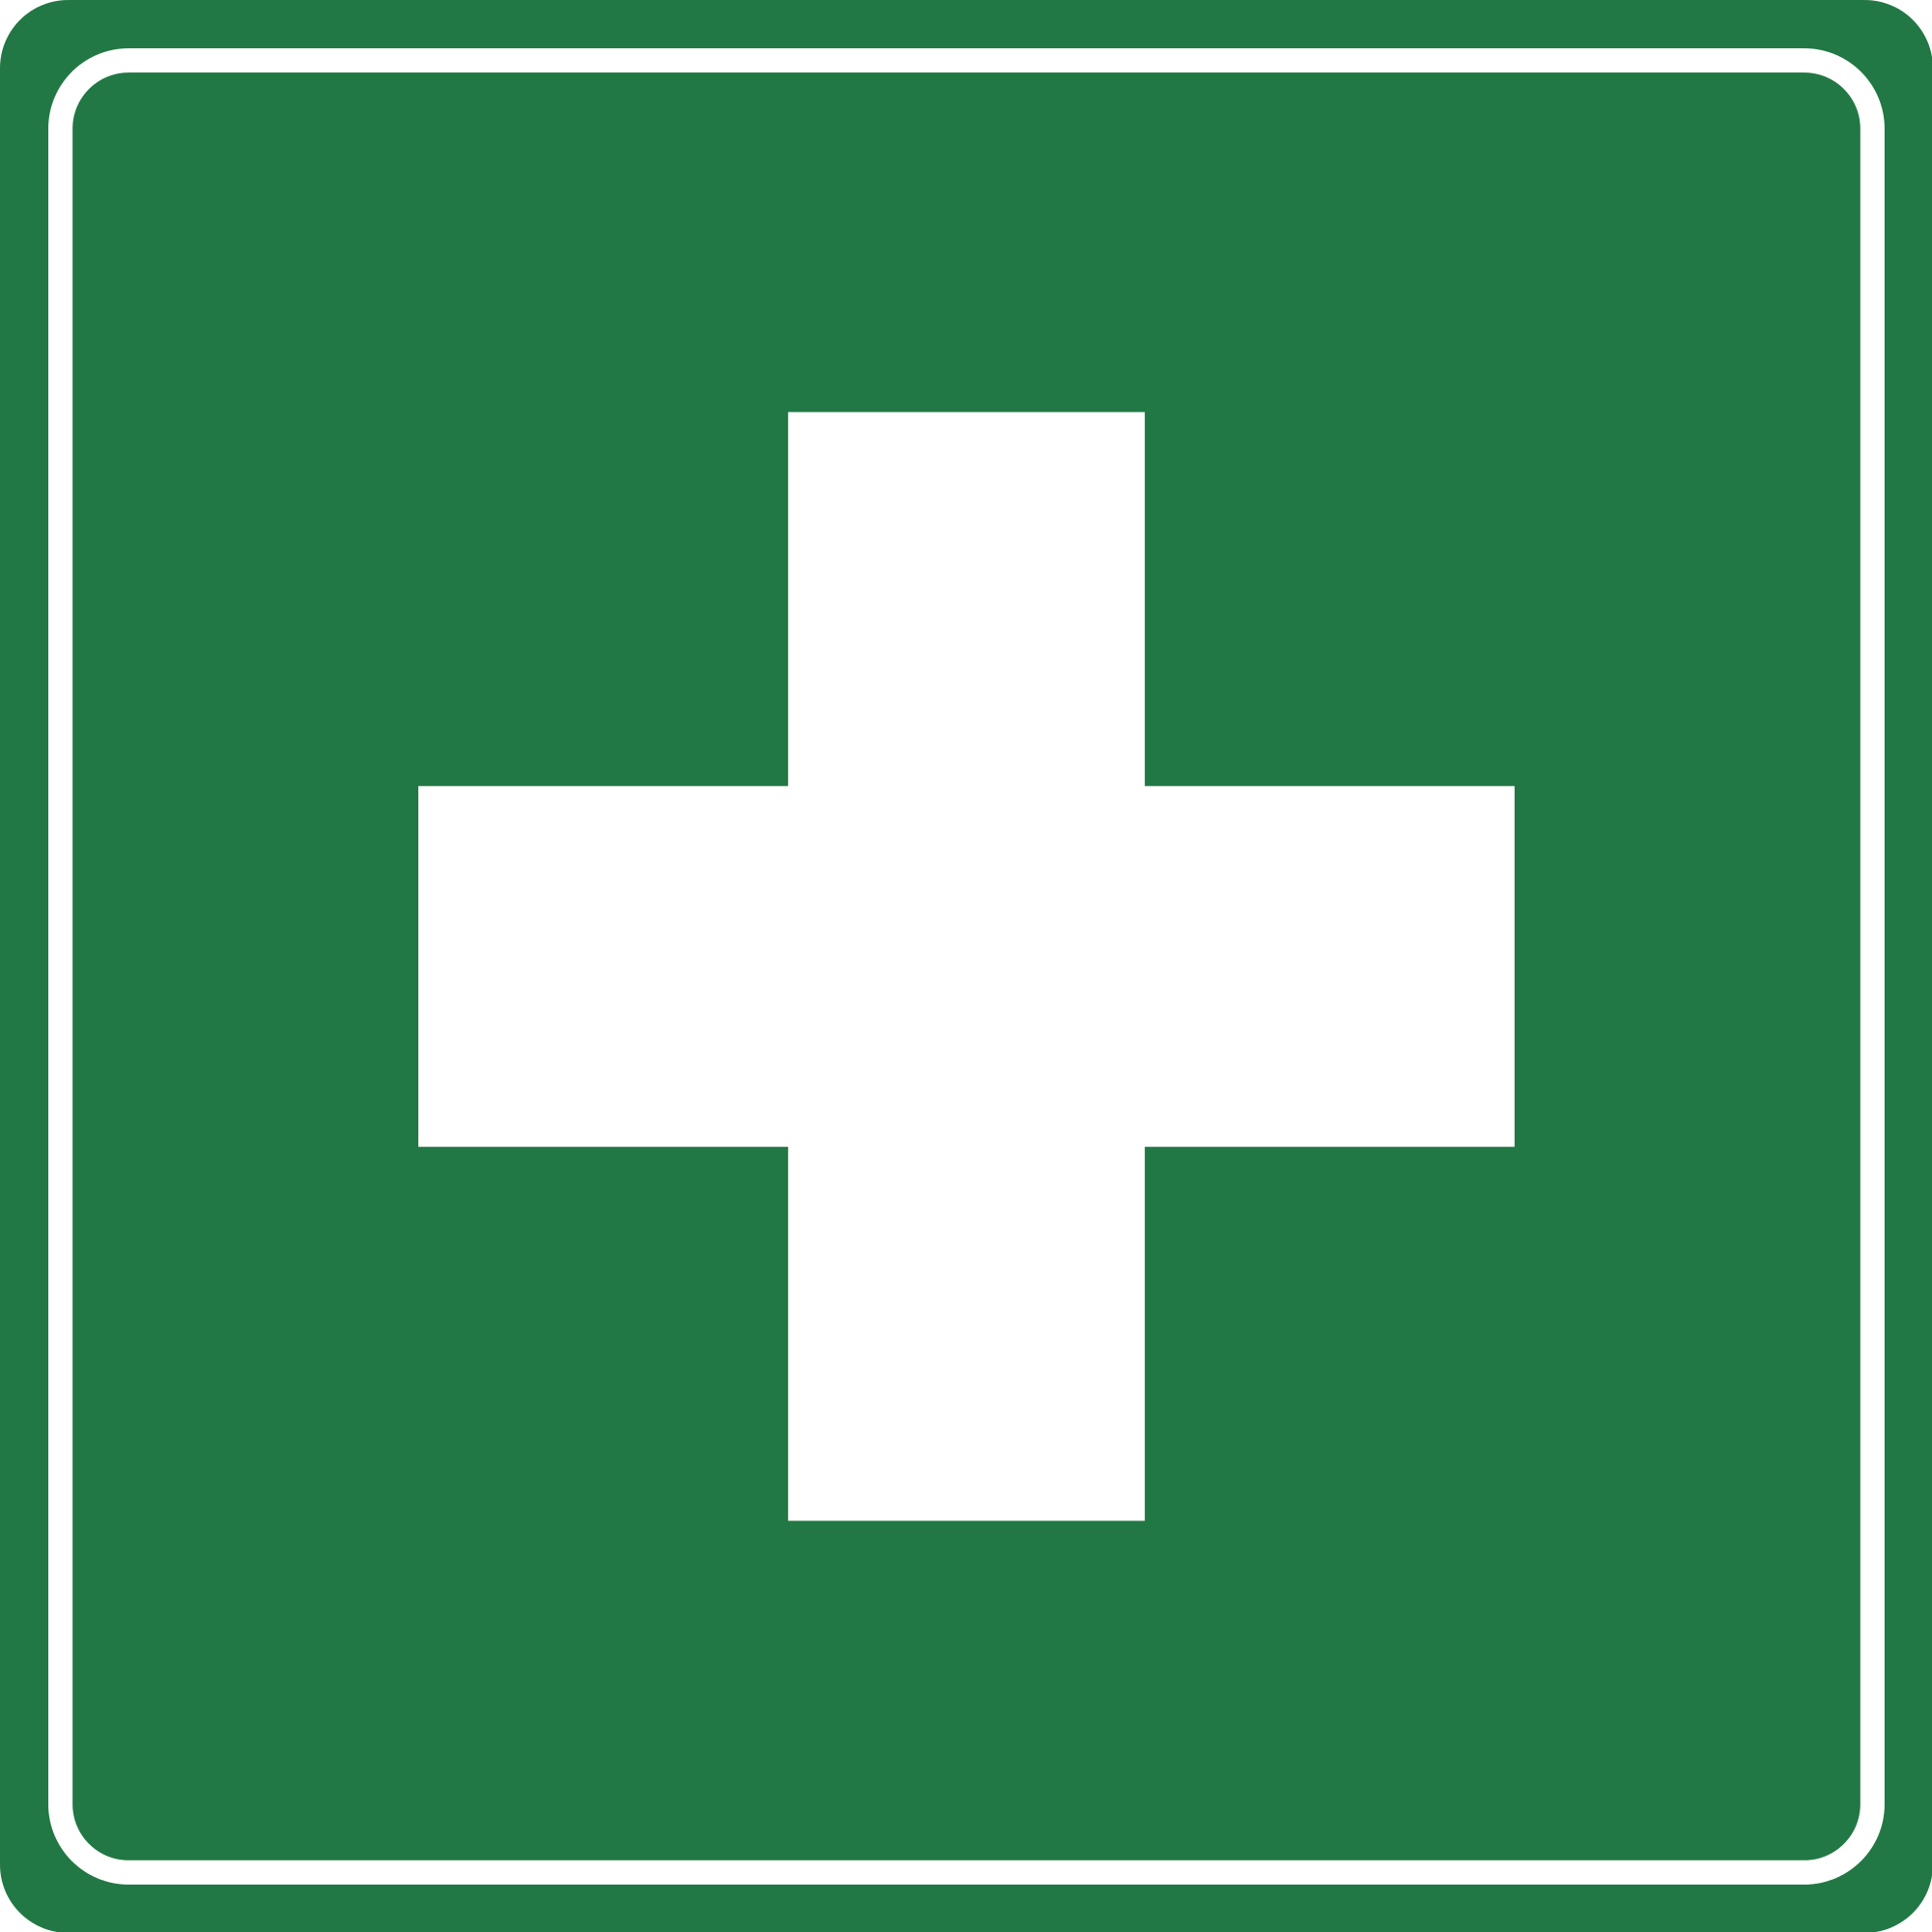 First aid - Wikipedia, the free encyclopedia